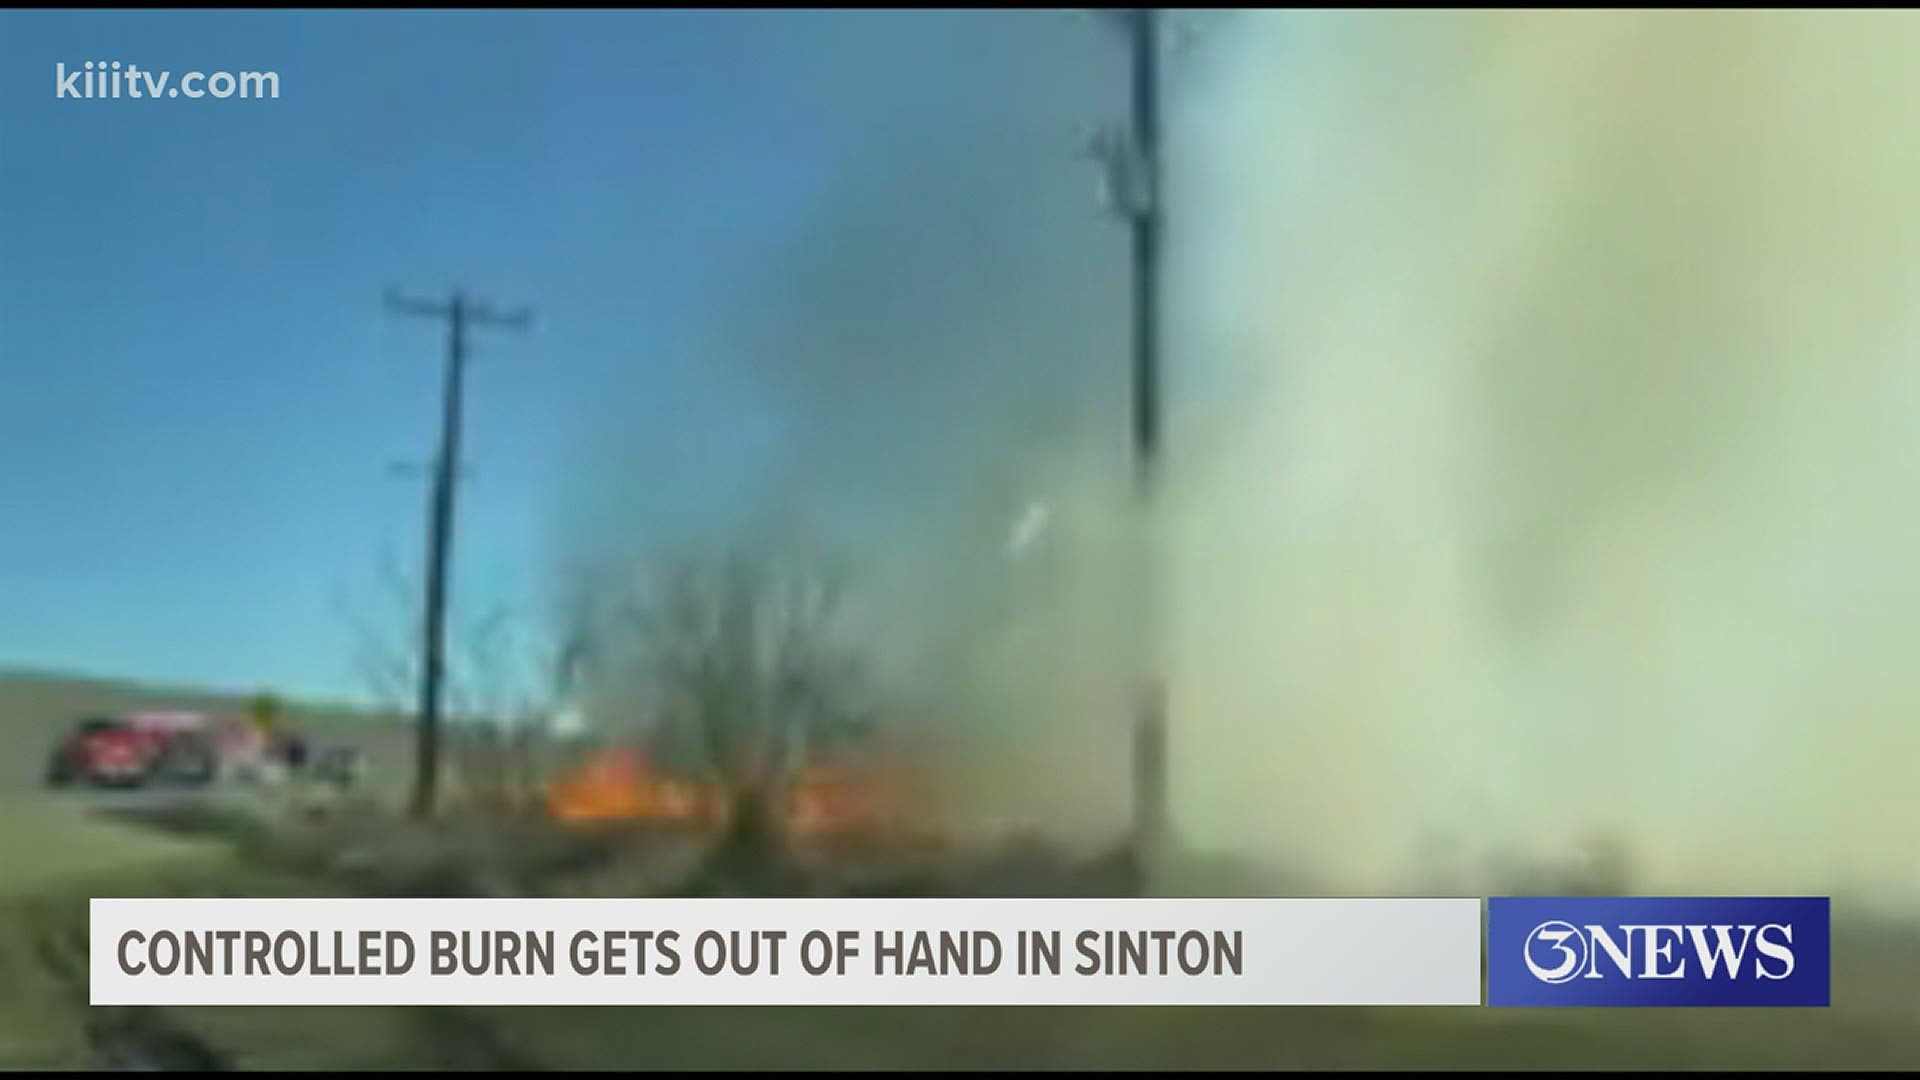 Fire crews from Sinton, Odem, Taft and Annavile were called to the scene to help.